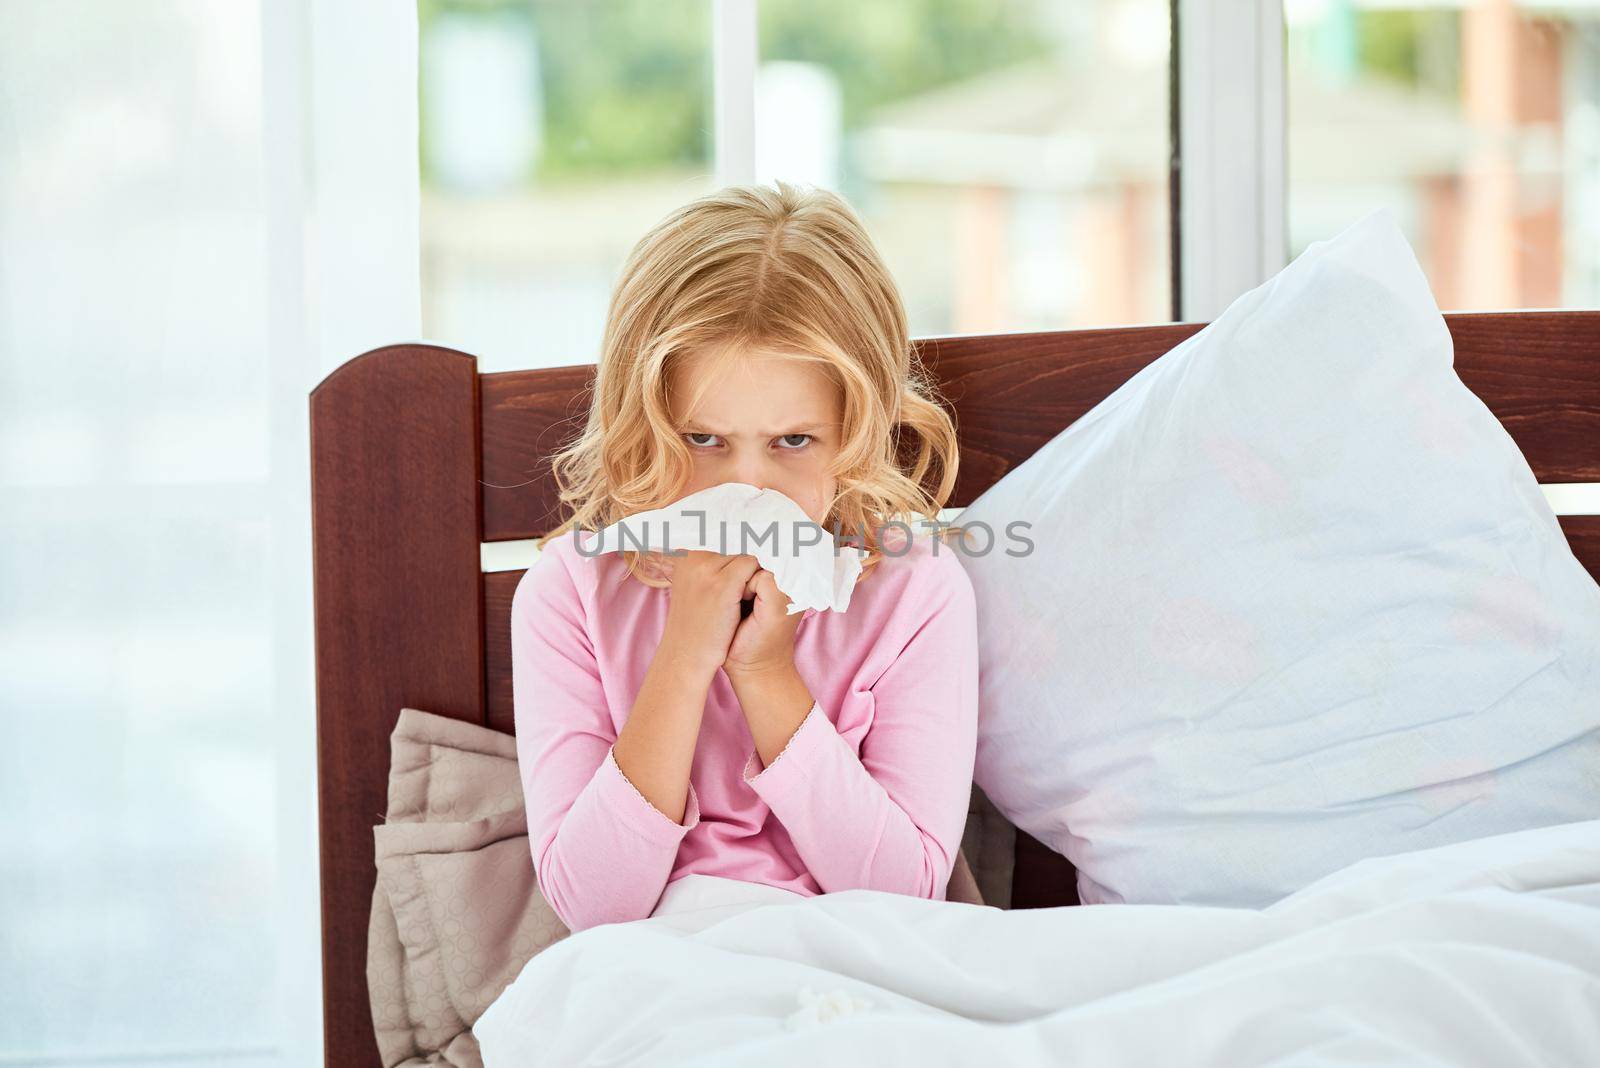 Virus infection. Little girl with runny nose suffering from cold or flu while lying in bed at home by friendsstock